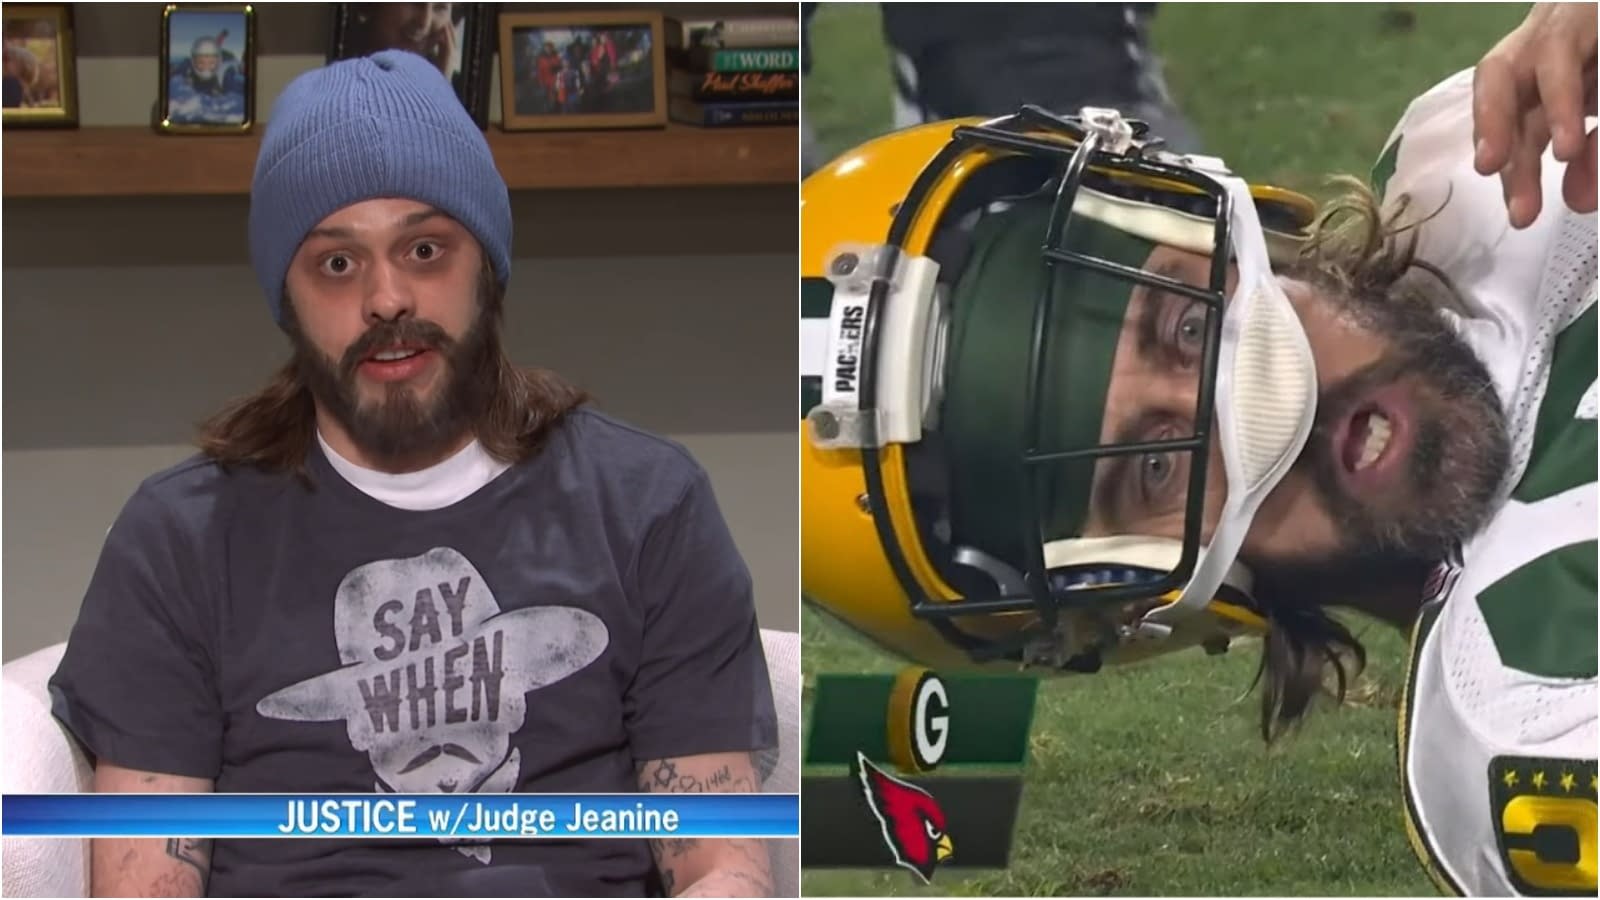 Saturday Night Live: Guess Aaron Rodgers Can't Take Hits Off the Field